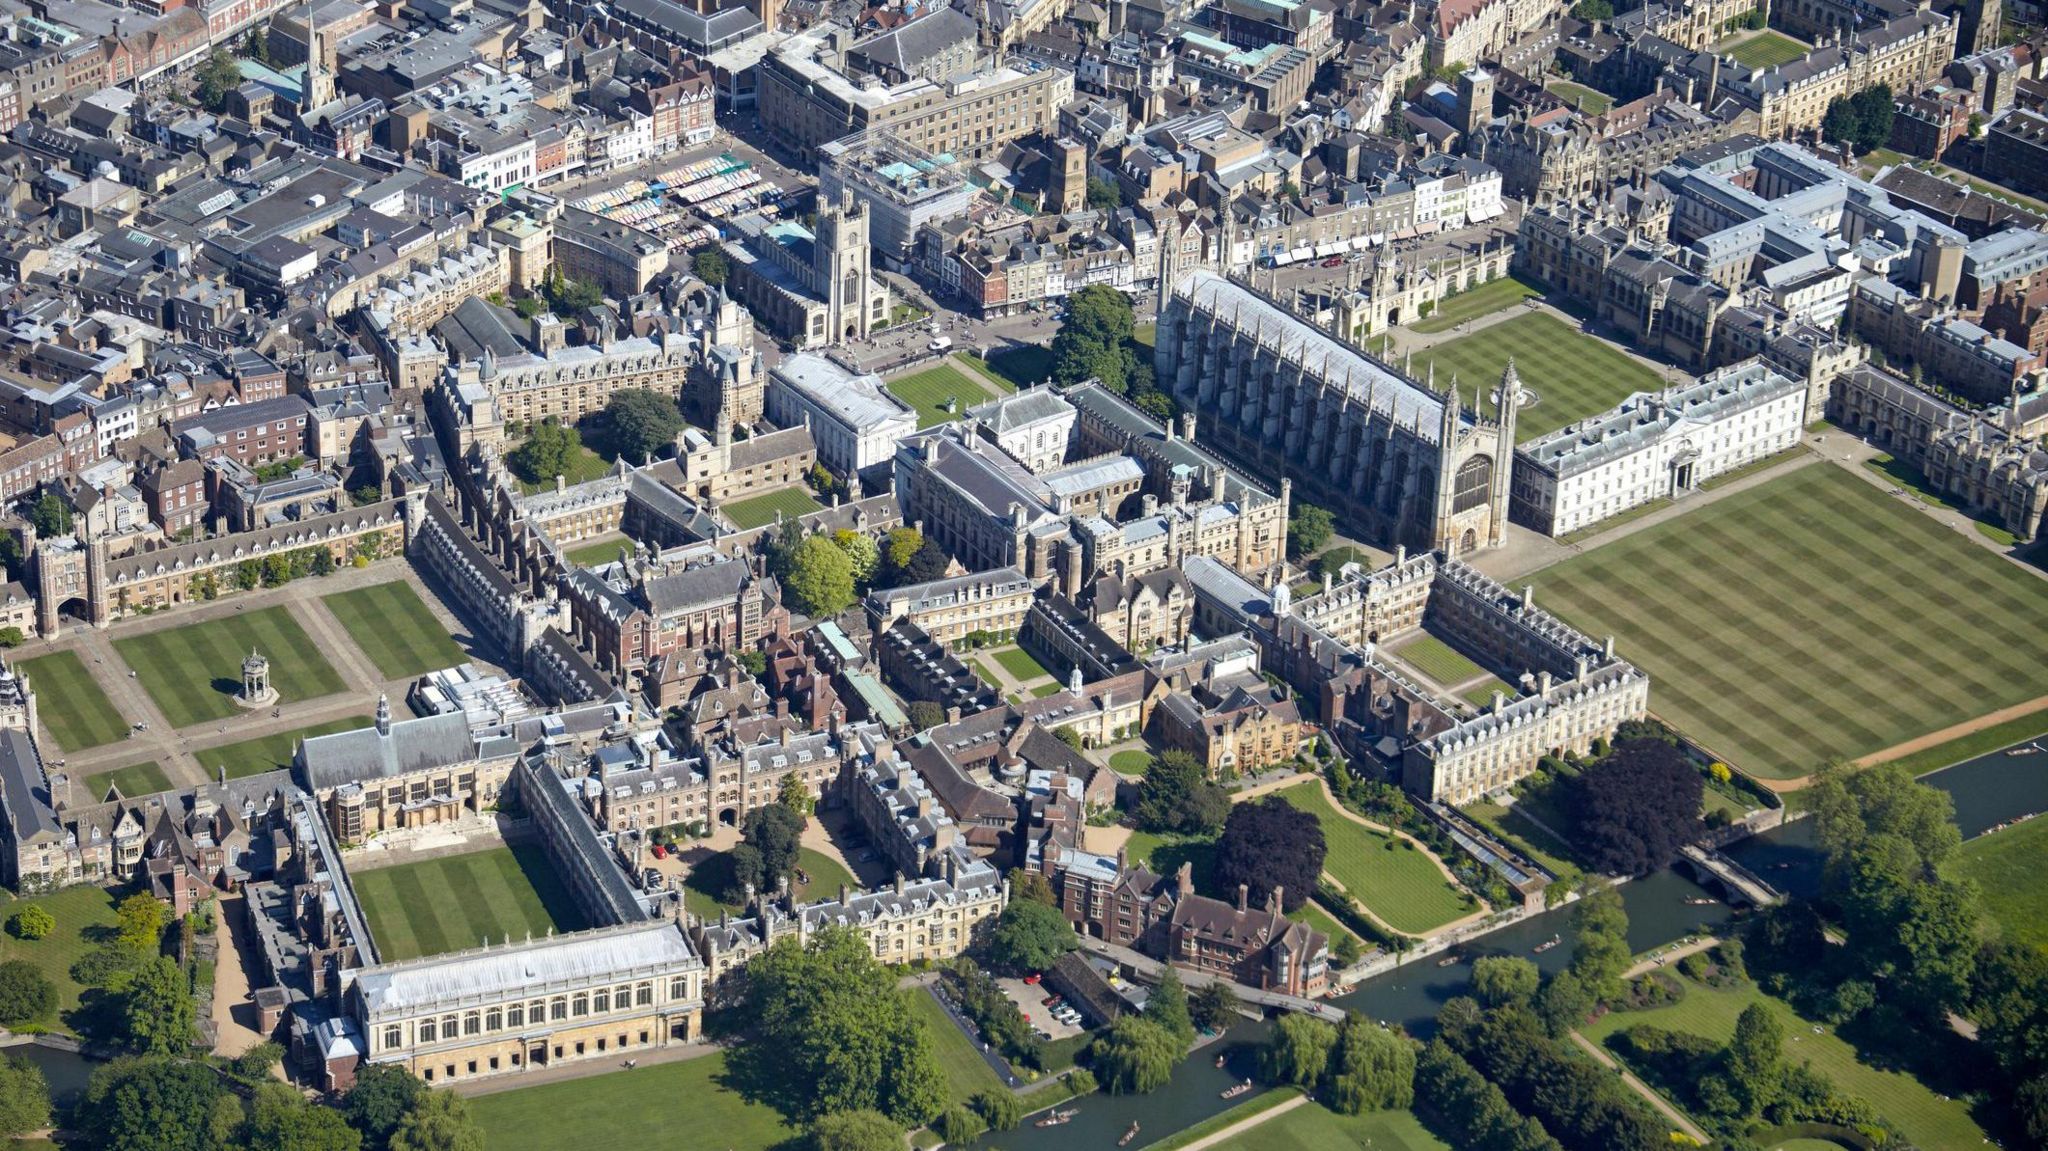 The University of Cambridge viewed from the sky